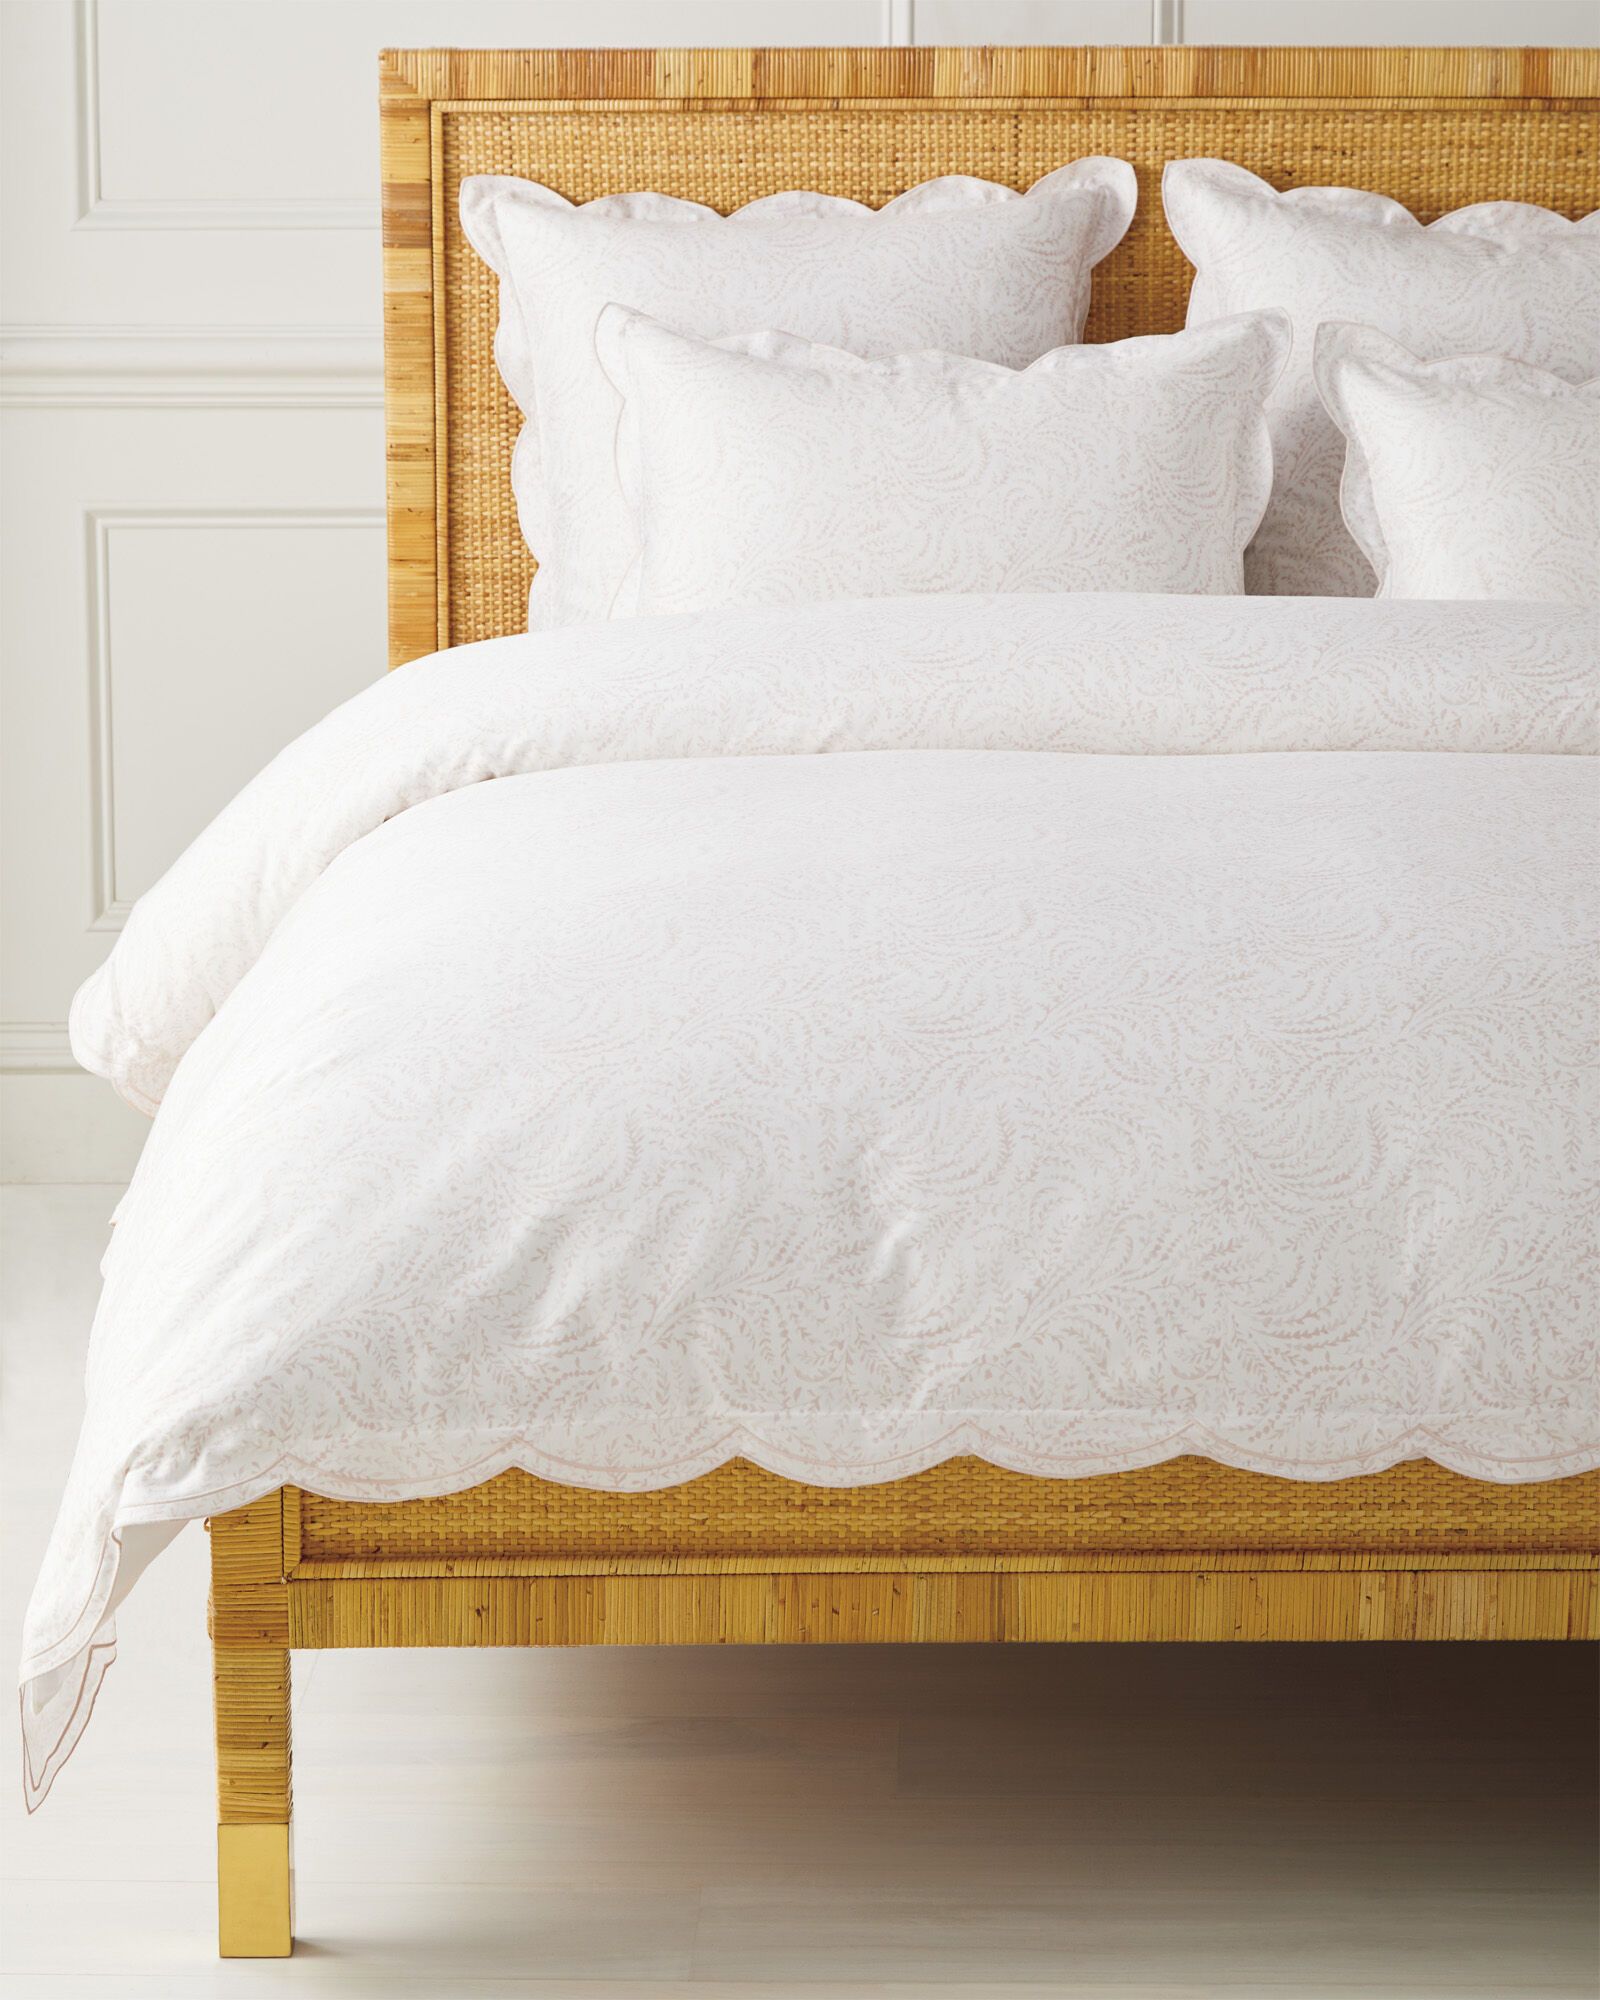 Priano Duvet Cover | Serena and Lily